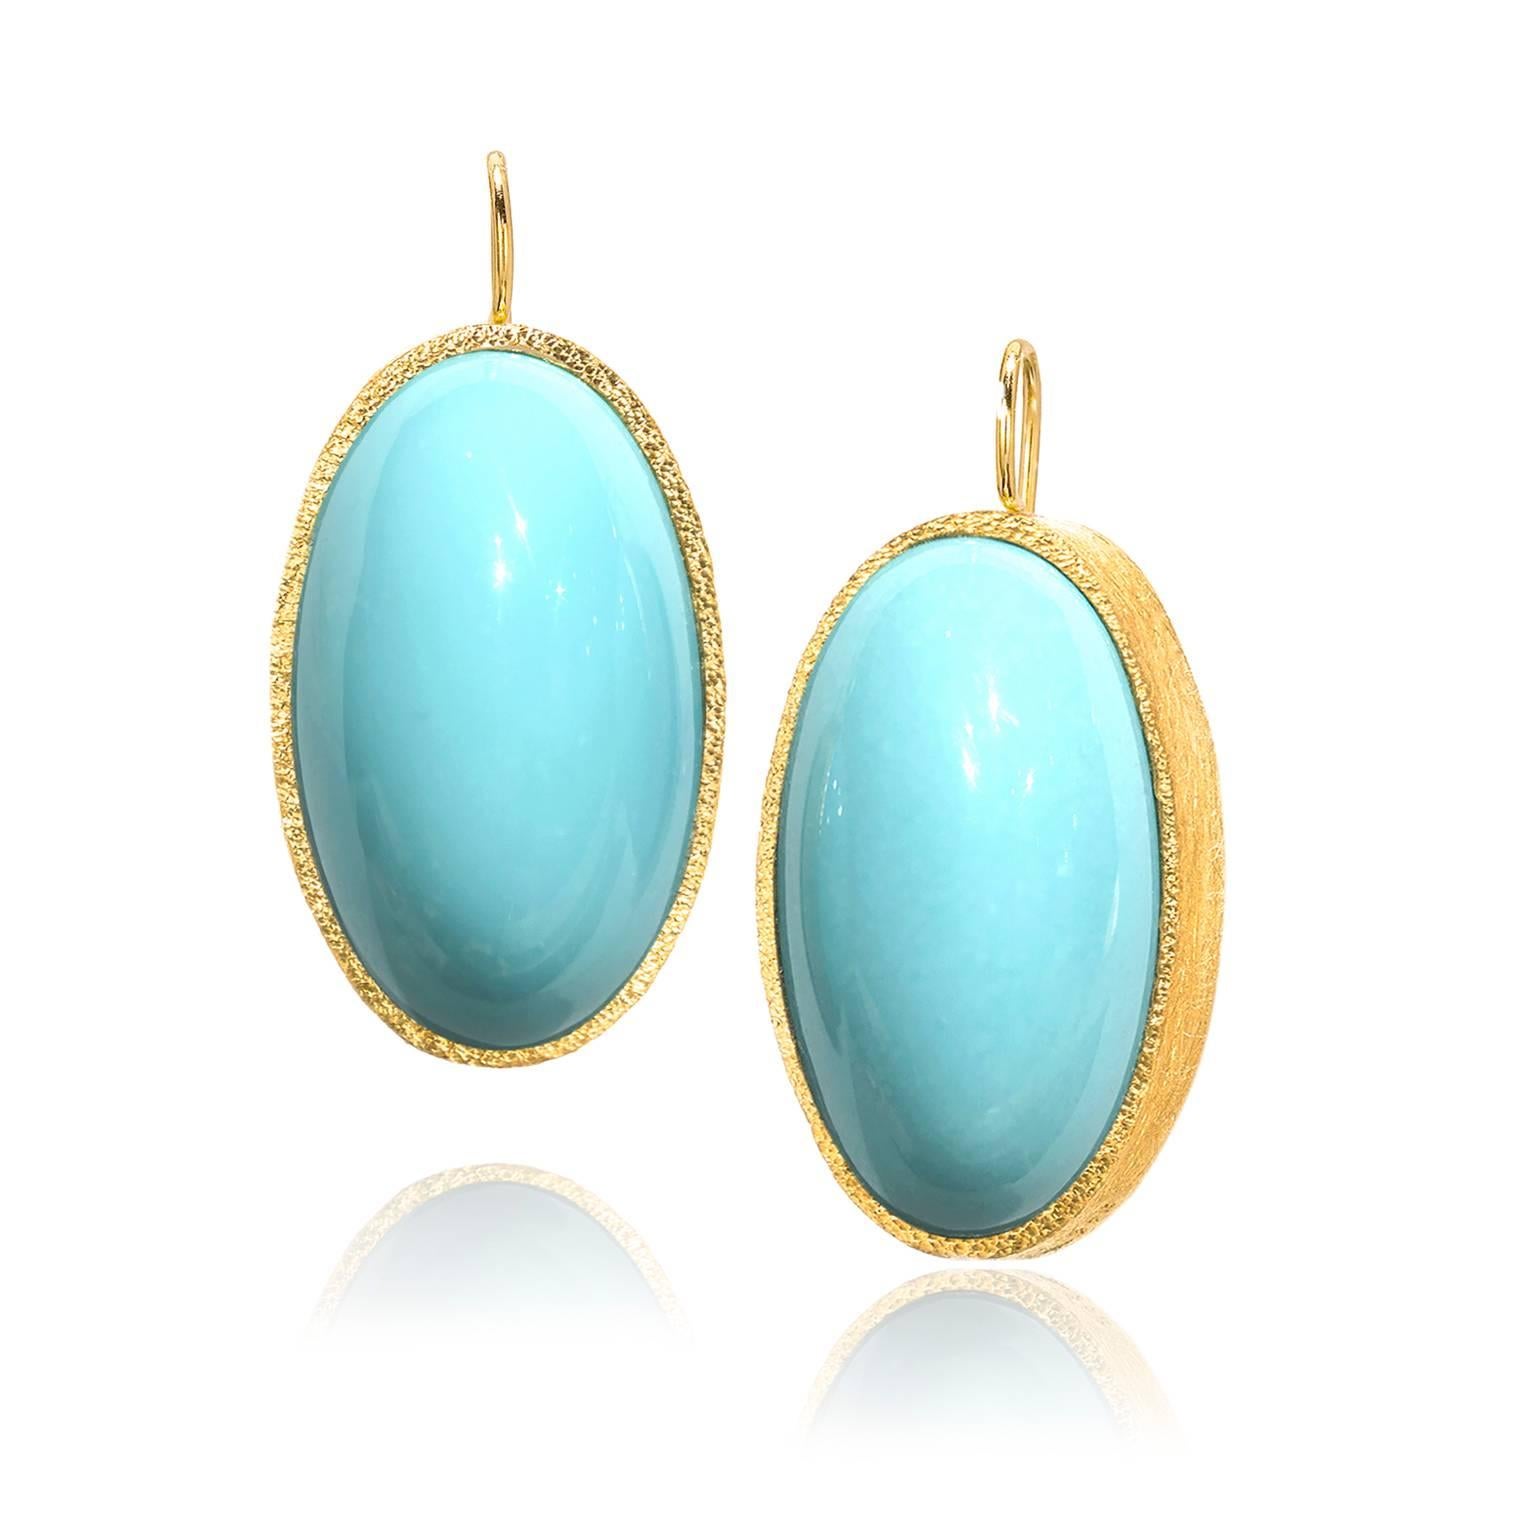 One-of-a-Kind Oval Bubble Earrings handcrafted by renowned jewelry artist Devta Doolan in his signature 22k yellow gold showcasing exceptional quality and color matched Persian turquoise cabochons bezel-set and hanging from gold wires. 

Each